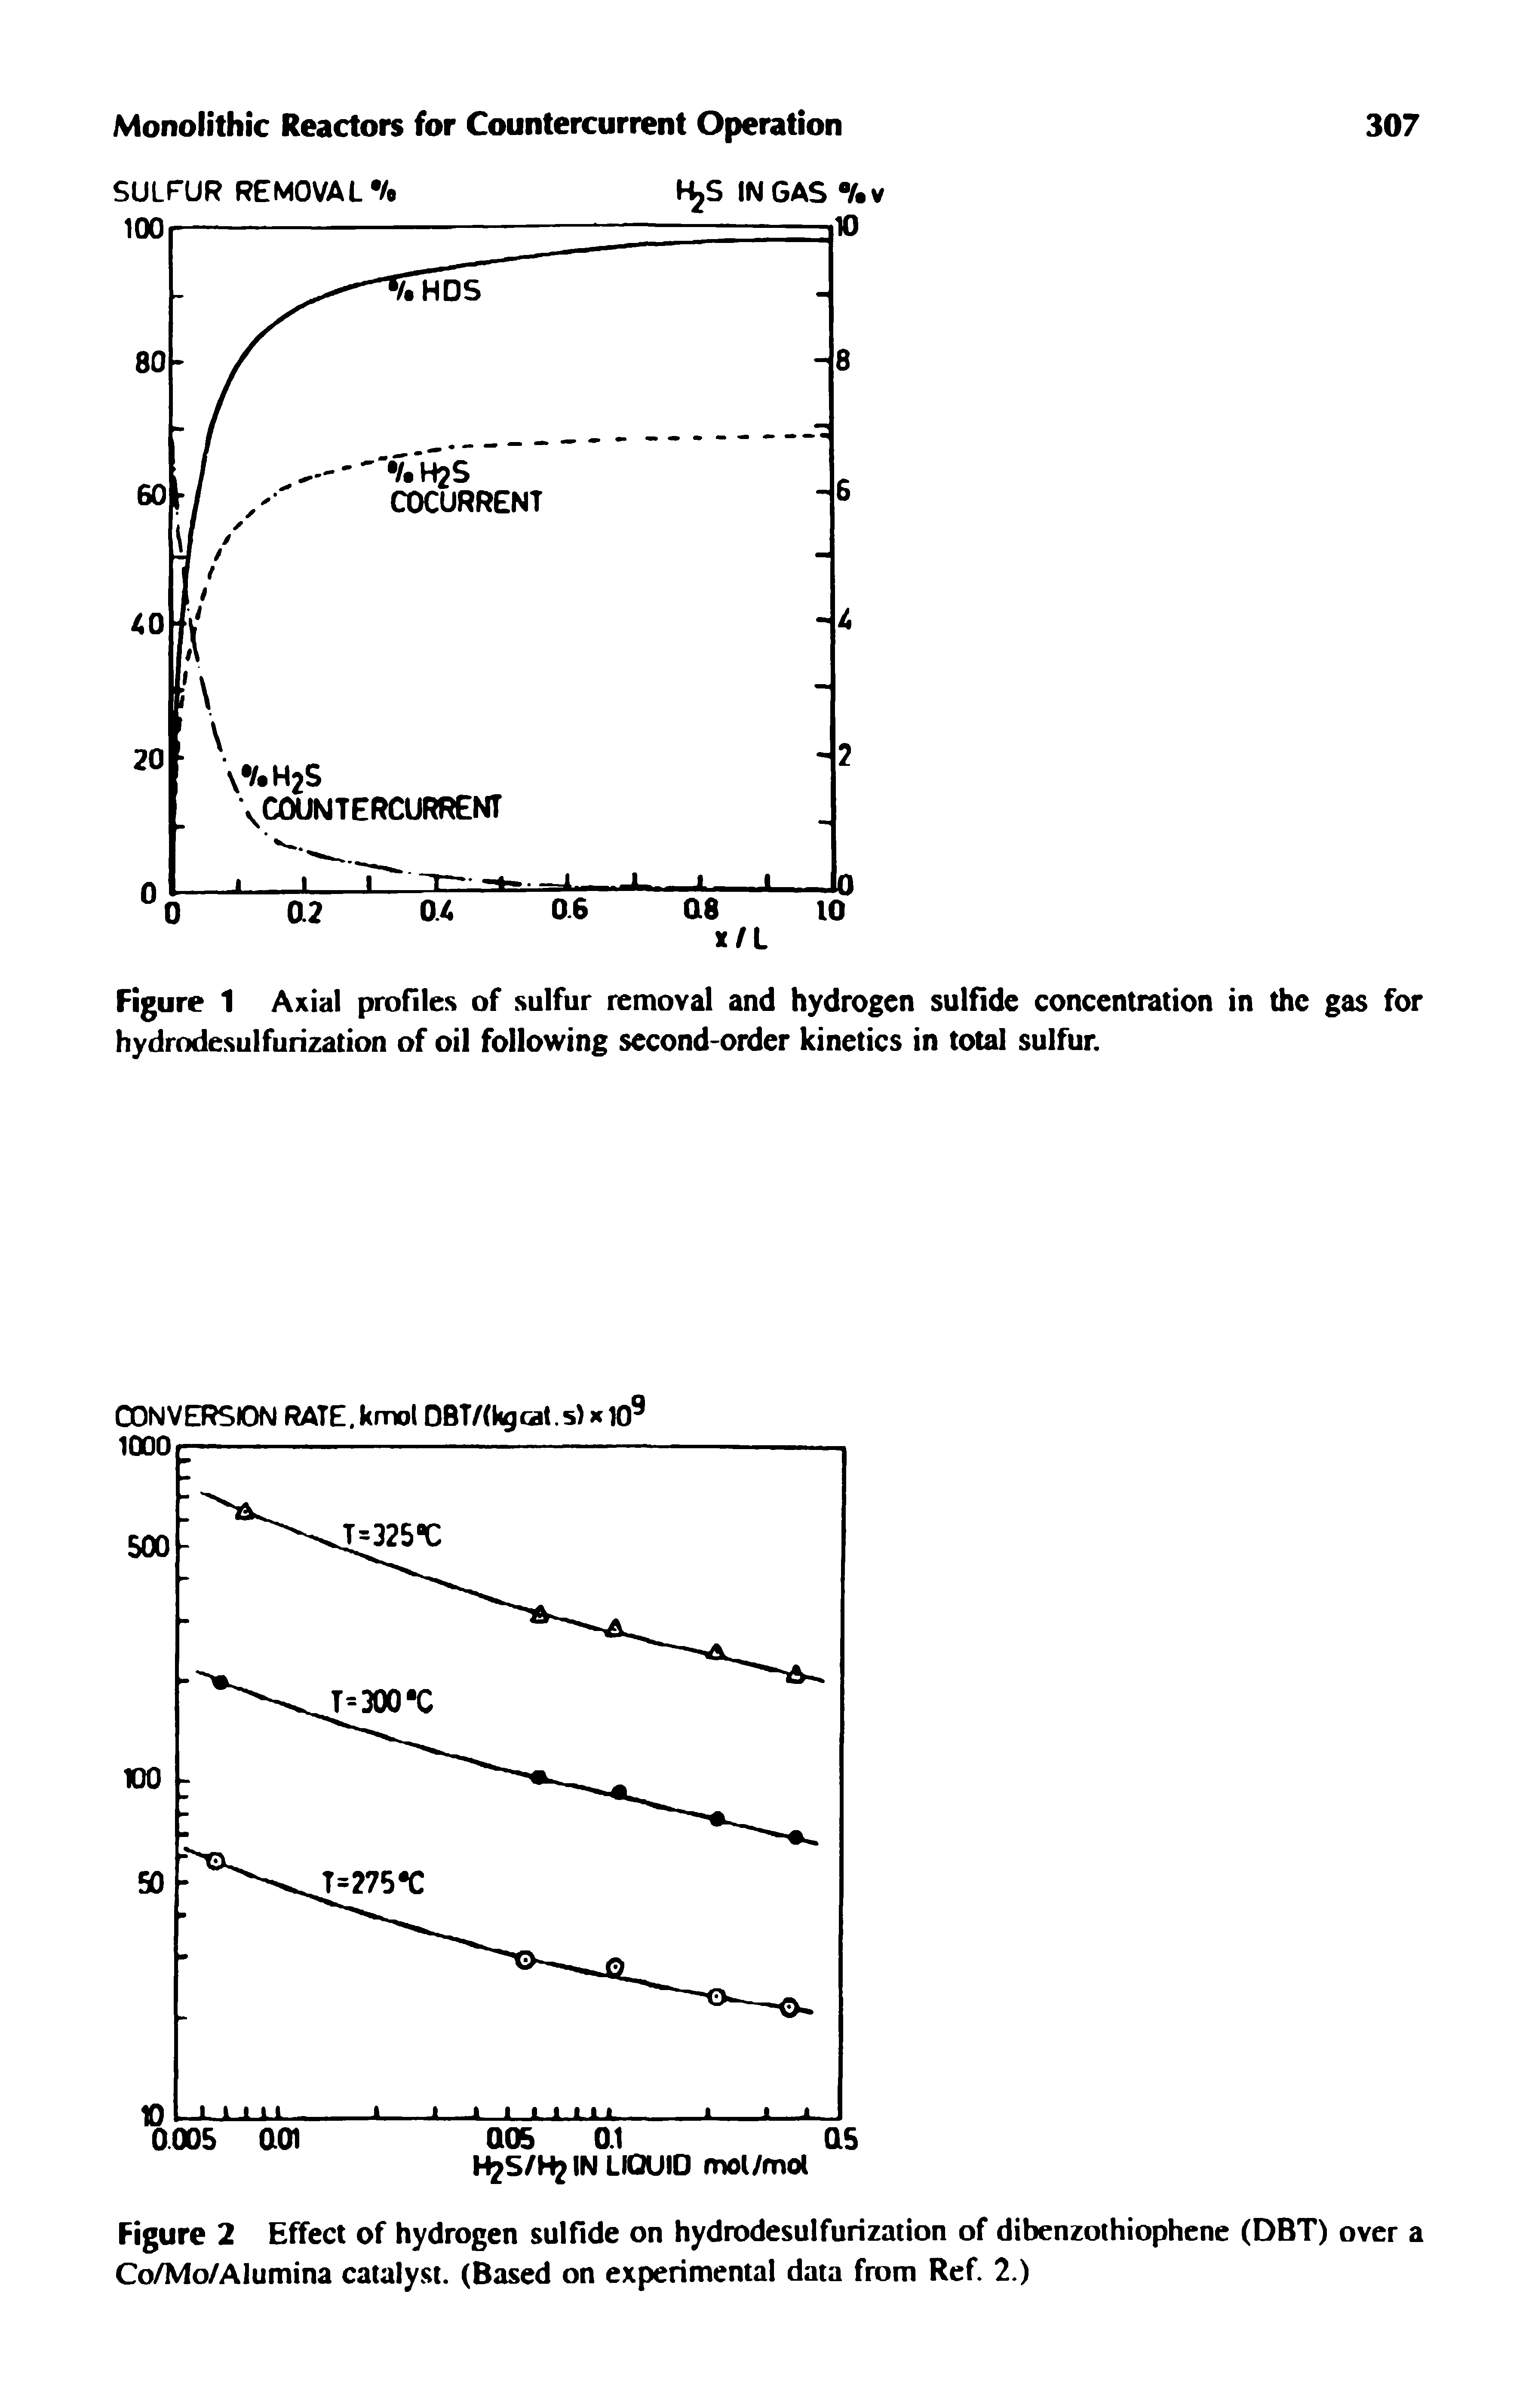 Figure 1 Axial profiles of sulfur removal and hydrogen sulfide concentration in the gas for hydrodesulfurization of oil following second-order kinetics in total sulfur.